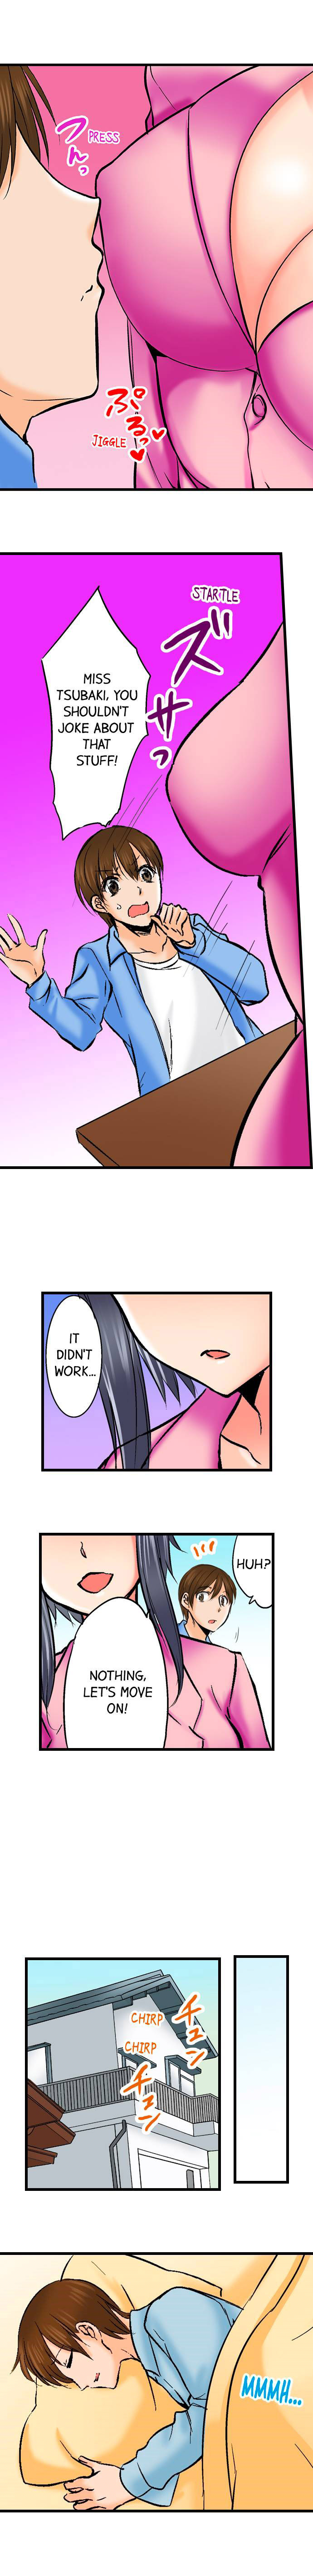 Touching My Older Sister Under the Table - Chapter 41 Page 6